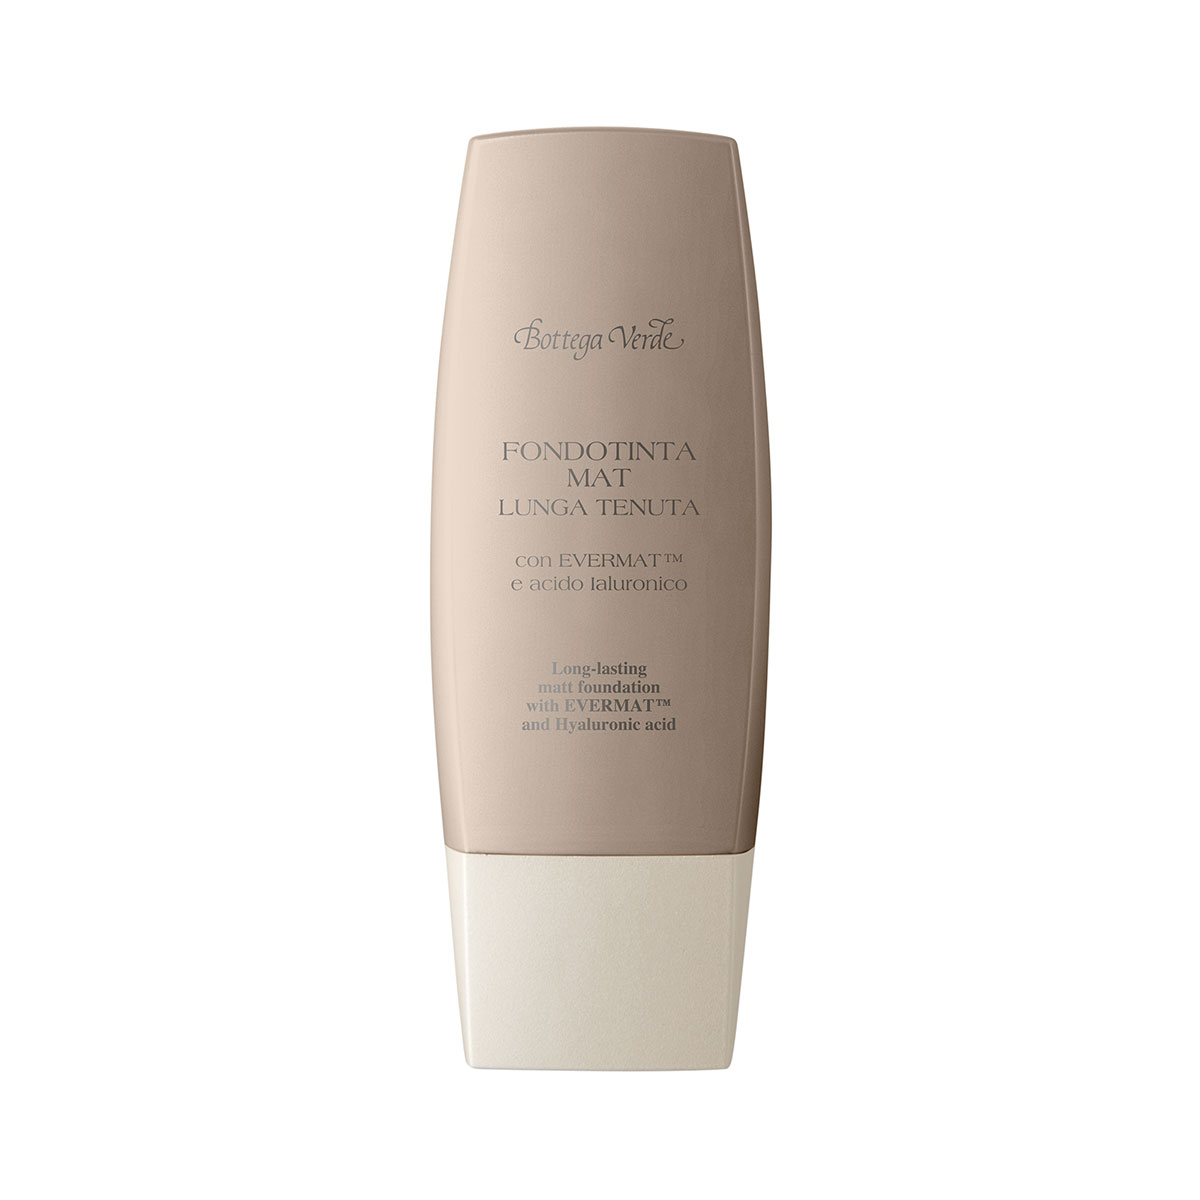 Long-lasting Matt Foundation with EVERMAT and Hyaluronic Acid (30 ml)